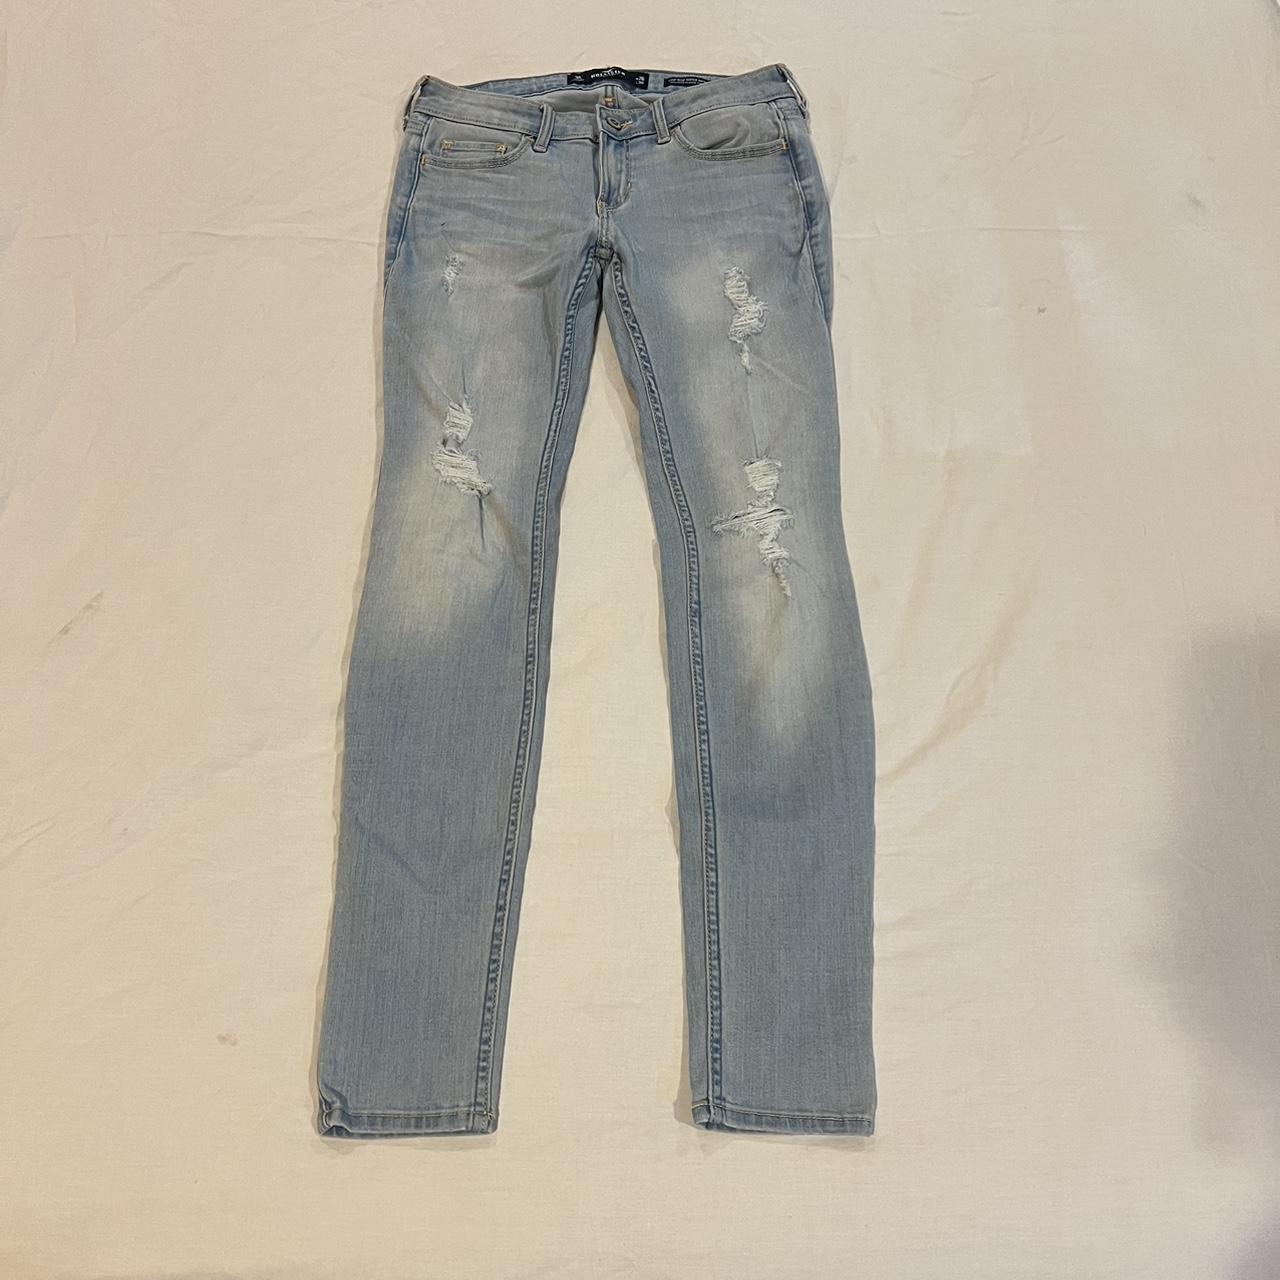 Low waisted Hollister ripped super skinny jeans! - Depop